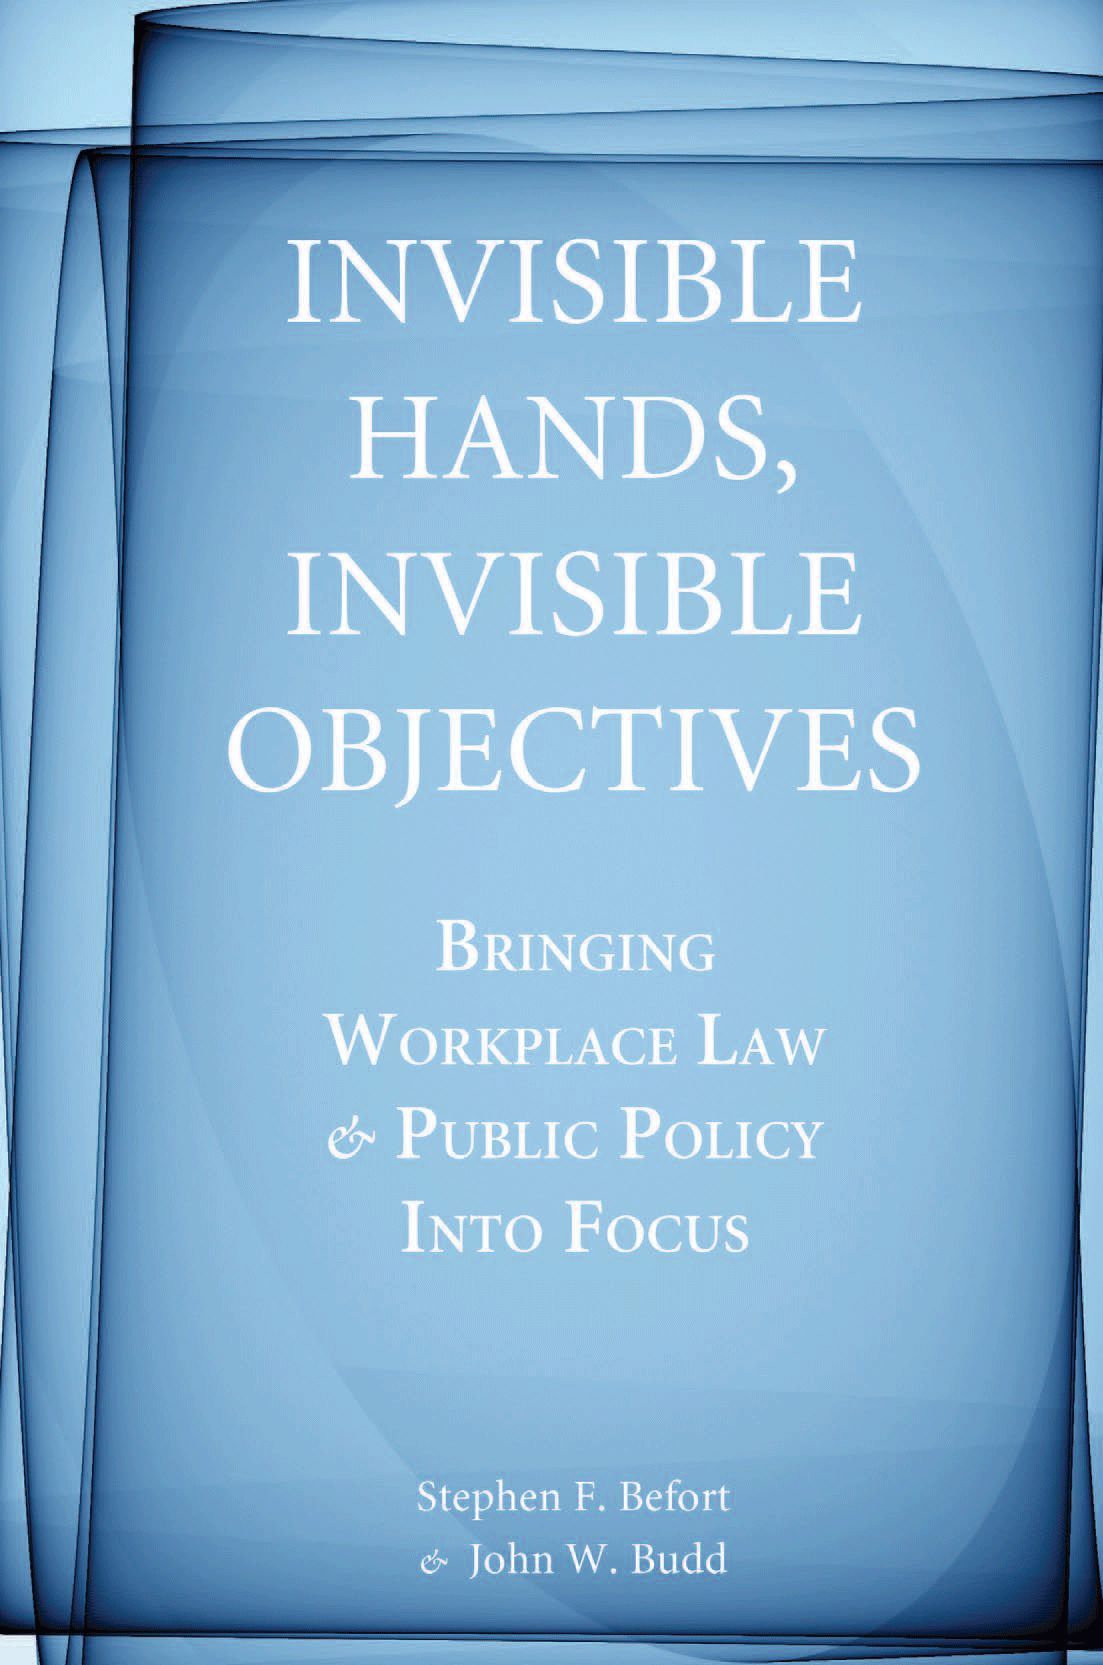 Invisible Hands, Invisible Objectives: Bringing Workplace Law and Public Policy Into Focus (Stanford Economics and Finance) Stephen F. Befort and John W. Budd